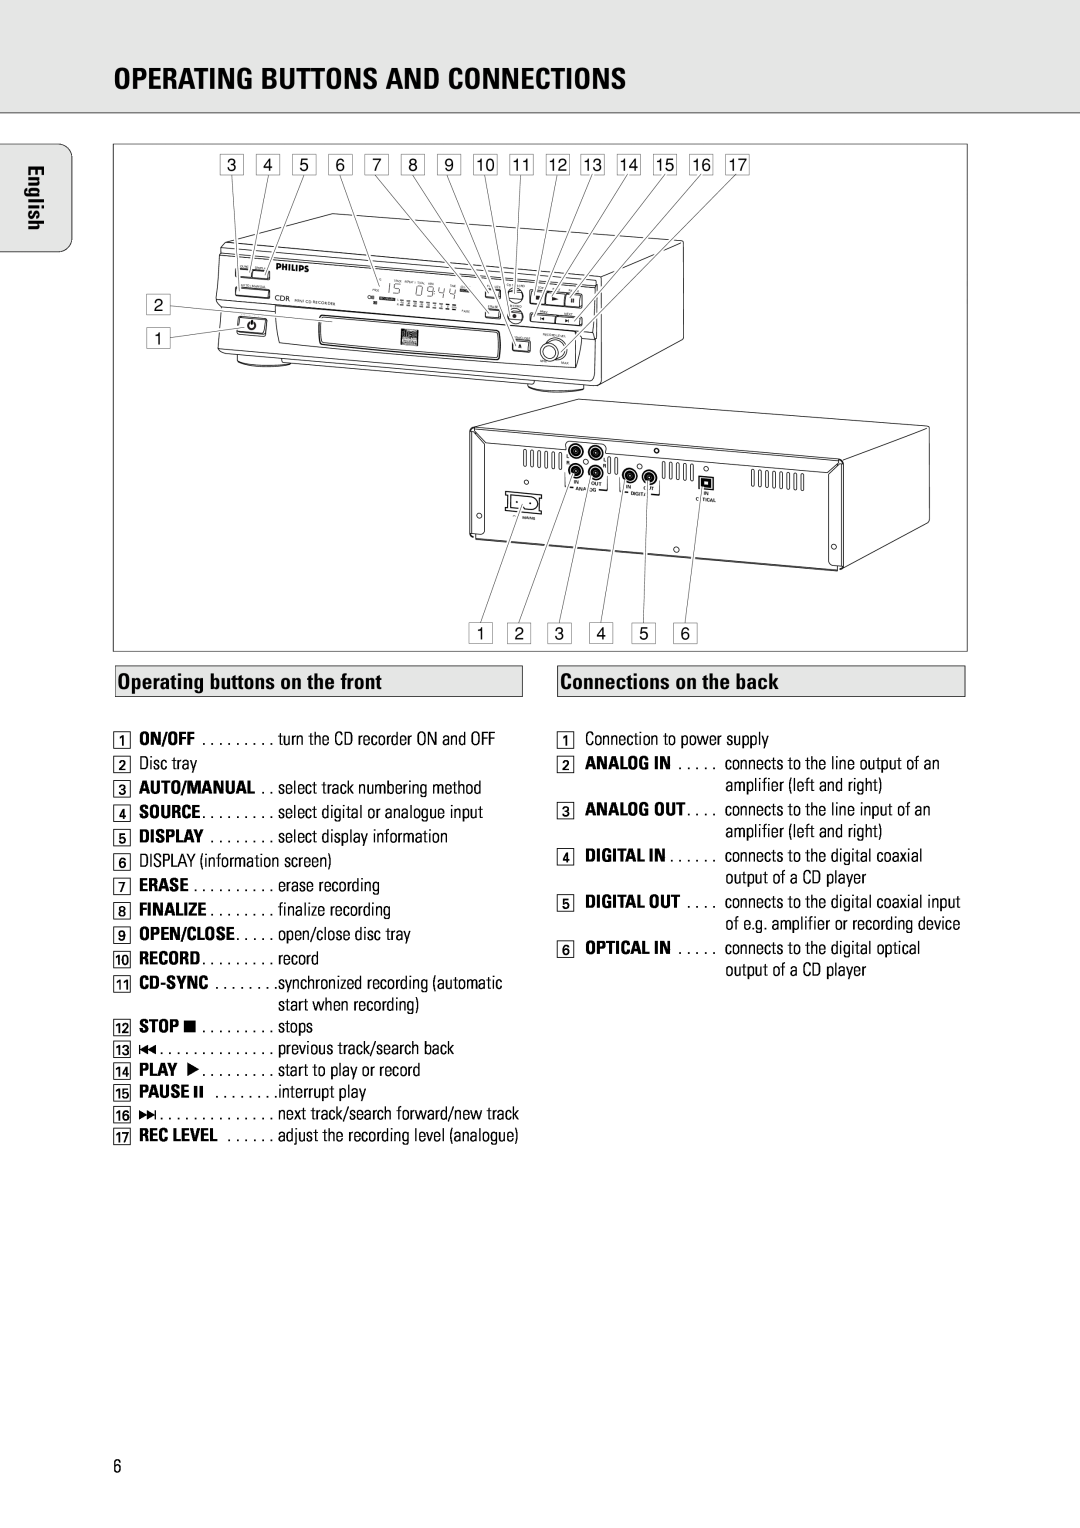 Philips CDR 560 manual Operating Buttons And Connections, Operating buttons on the front, Connections on the back, English 